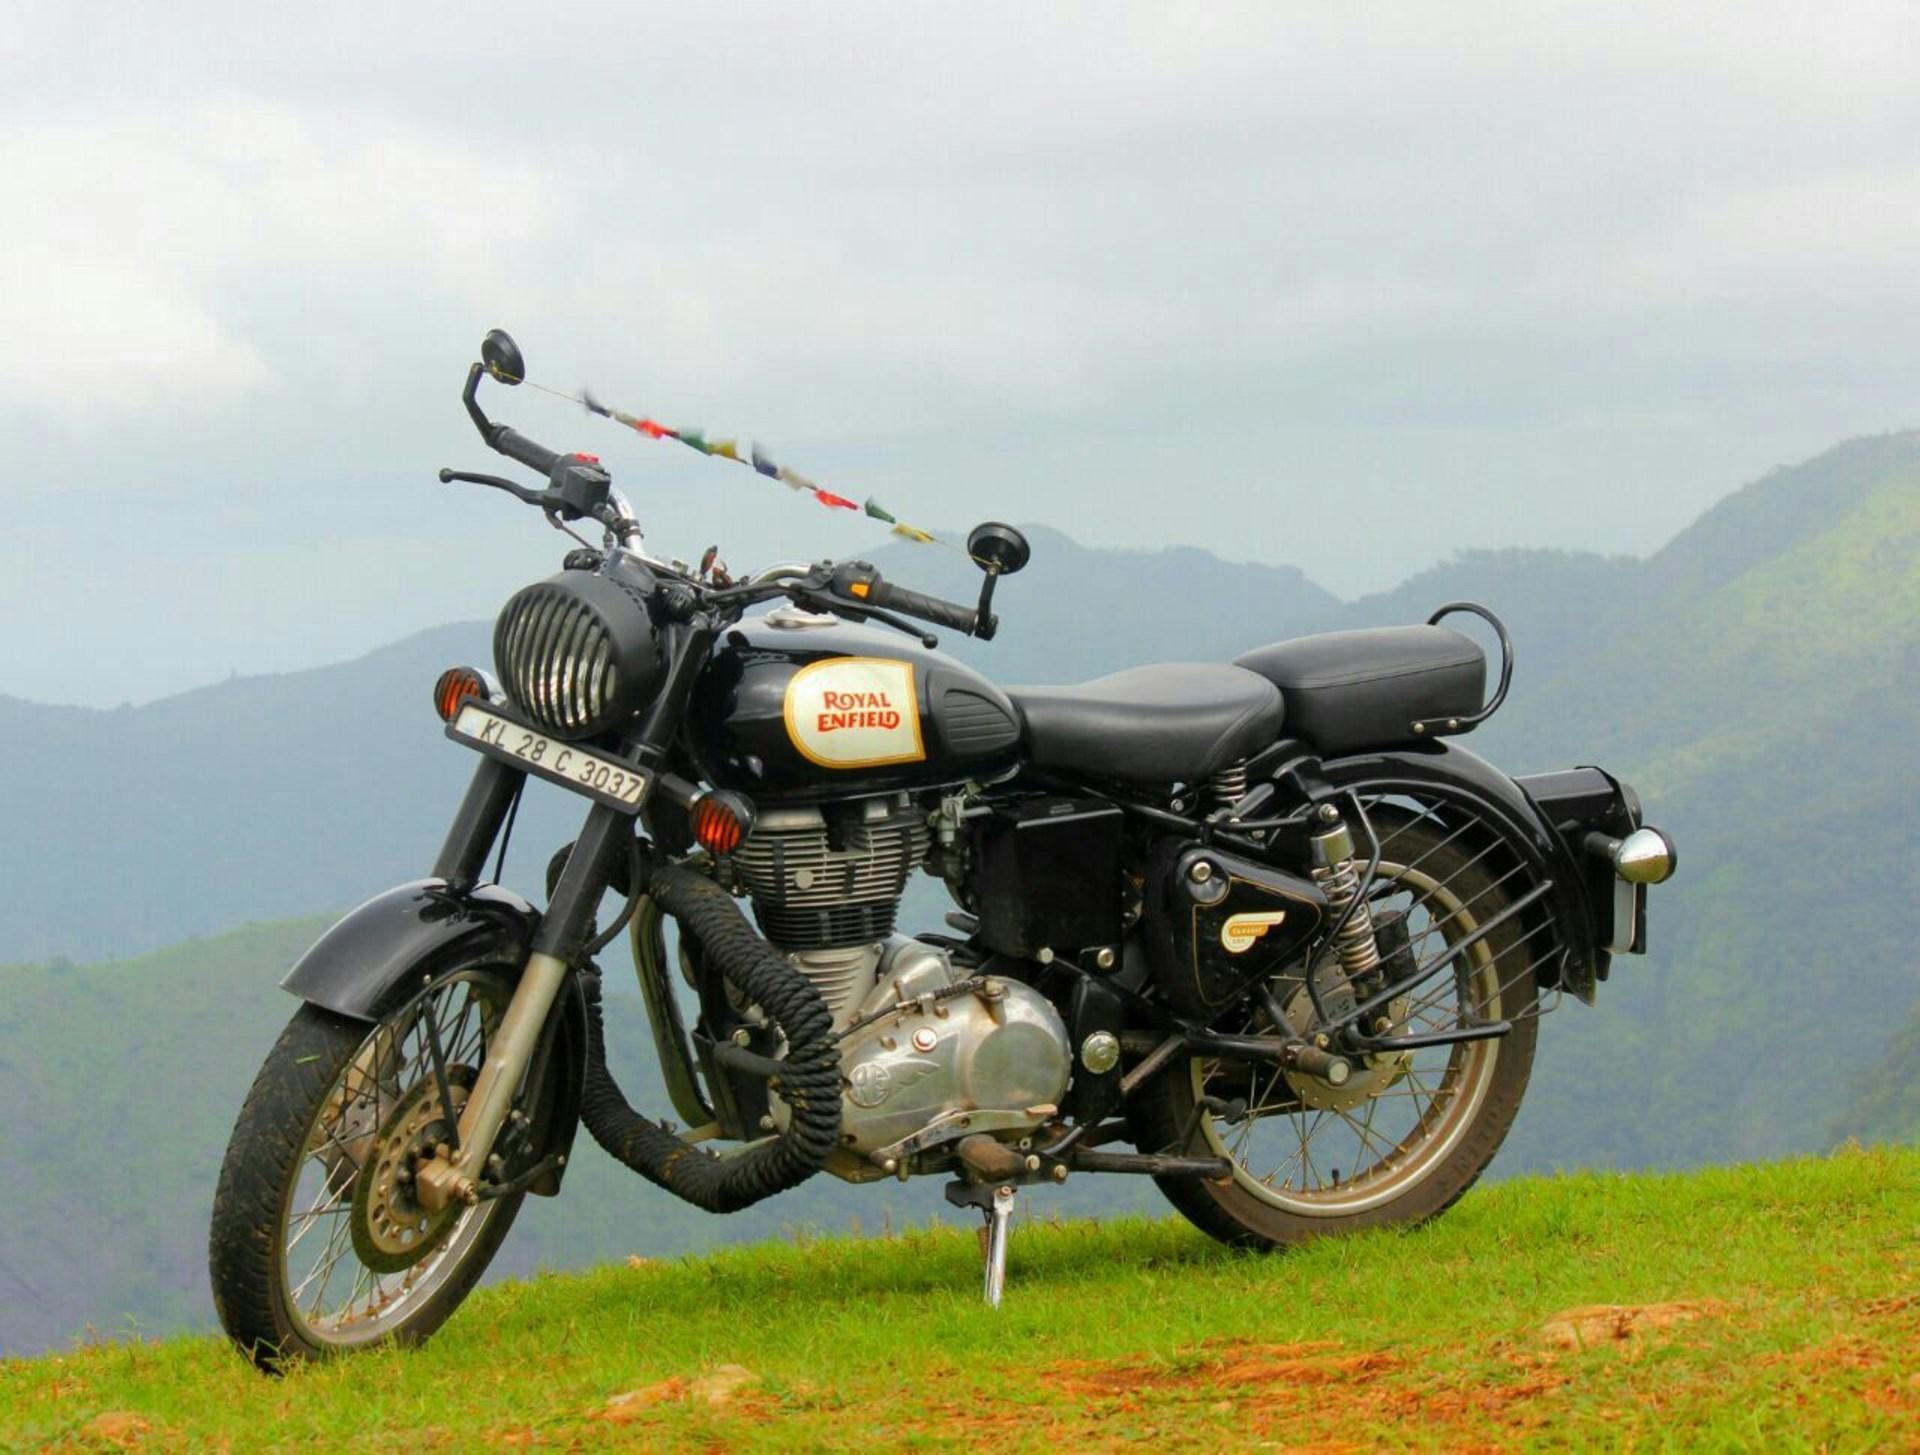 Royal Enfield Wallpaper For Laptop - Rev Up Your Screens with Stunning